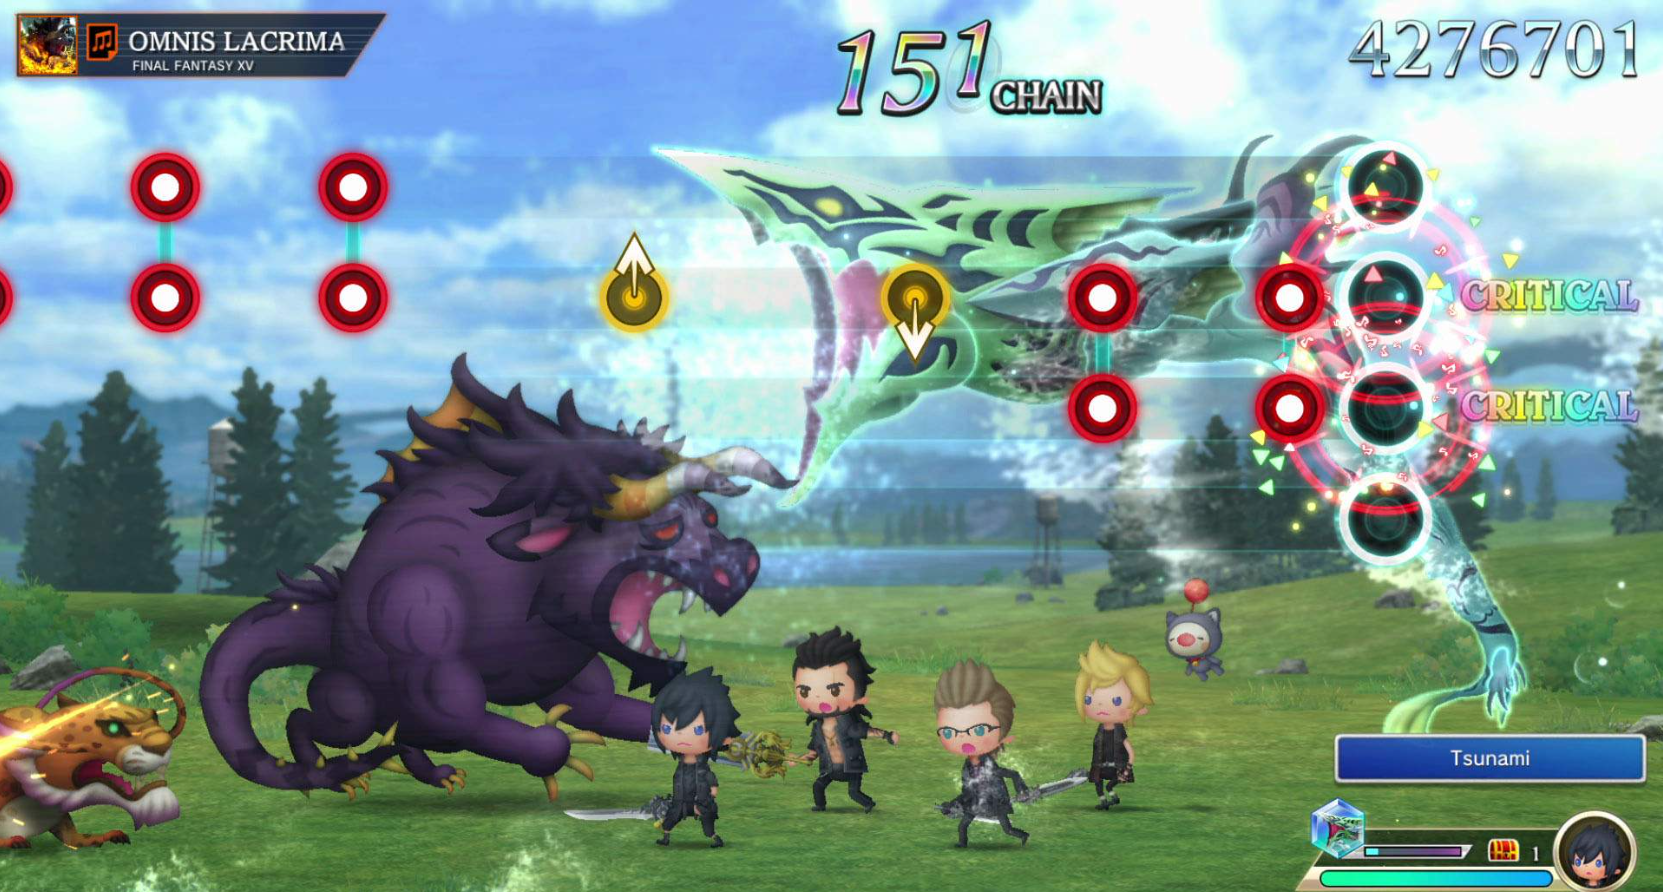 Screenshot of the game. Several main characters face off against a bull monster and a leopard monster.